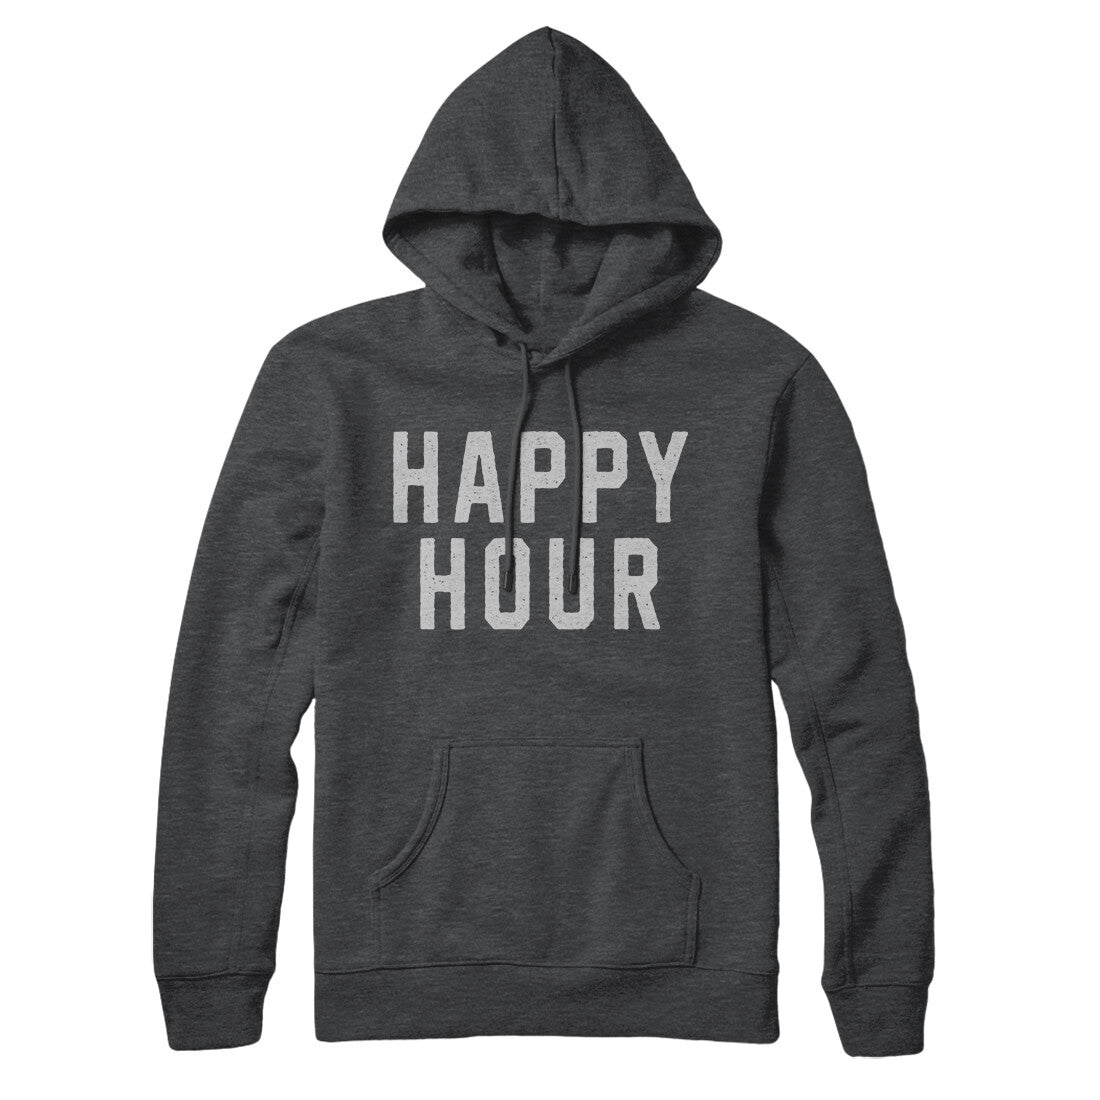 Happy Hour in Charcoal Heather Color